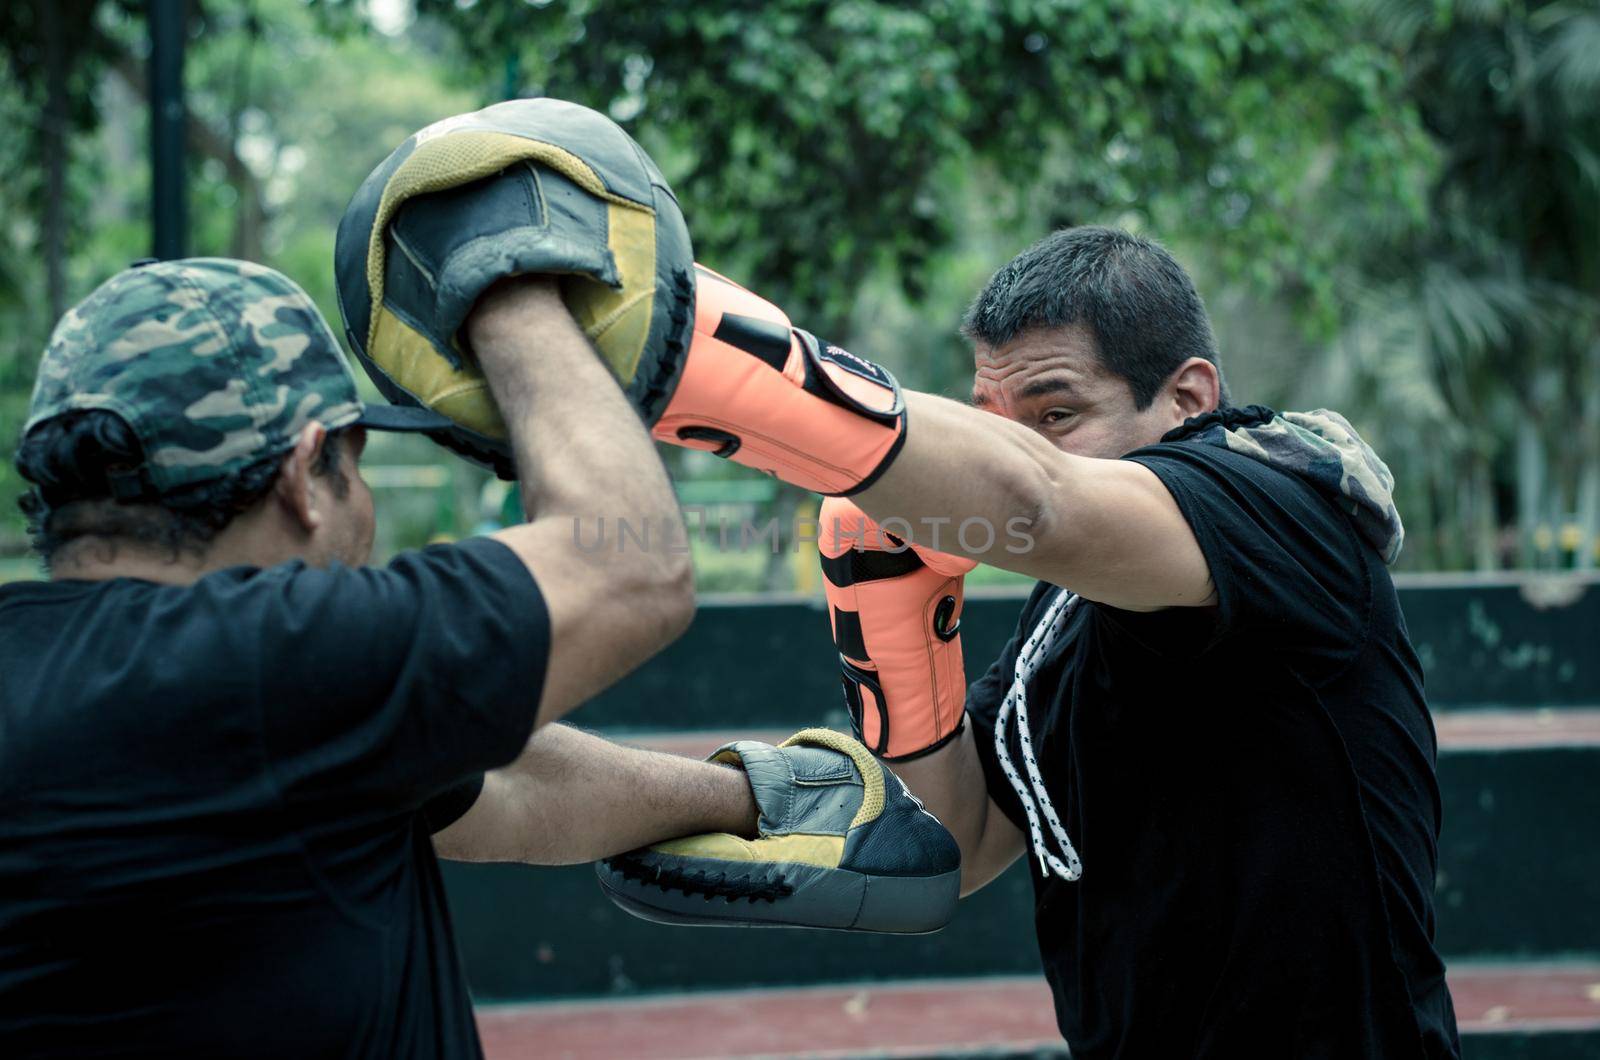 boxing outdoor workout with trainer, punching exercises with personal coach